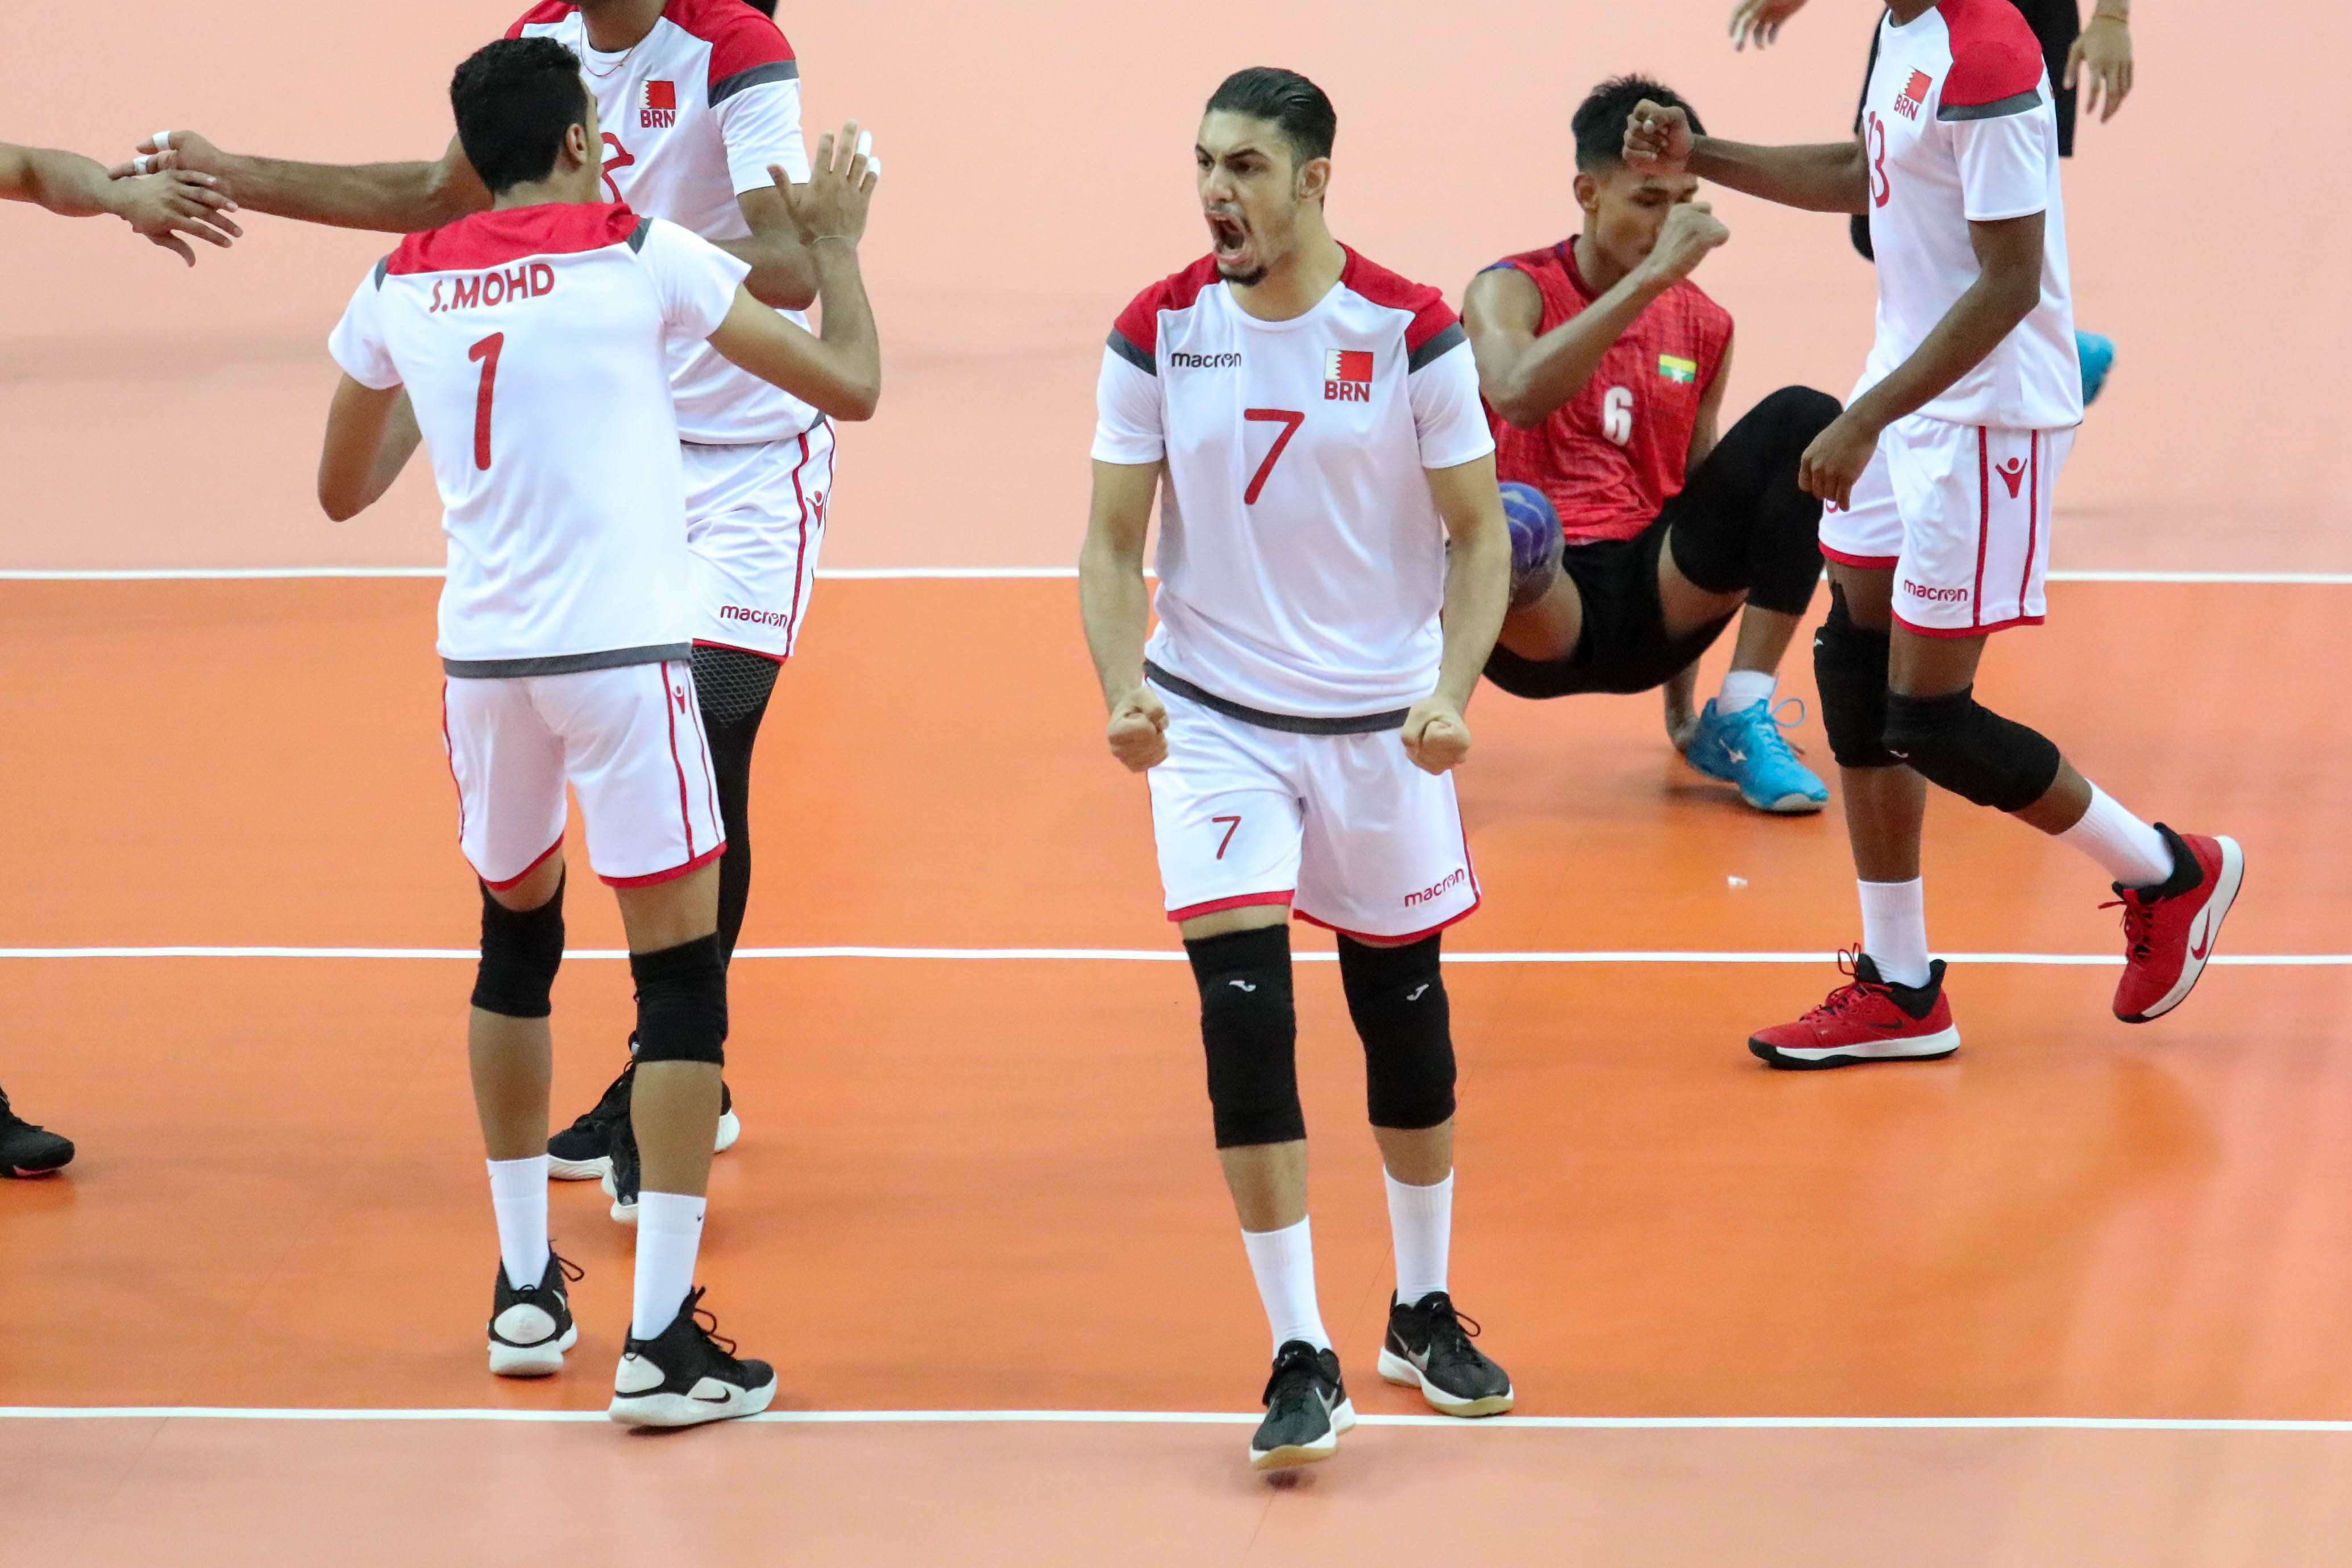 BAHRAIN POWER PAST HOSTS MYANMAR IN CLOSELY-CONTESTED AFFAIR